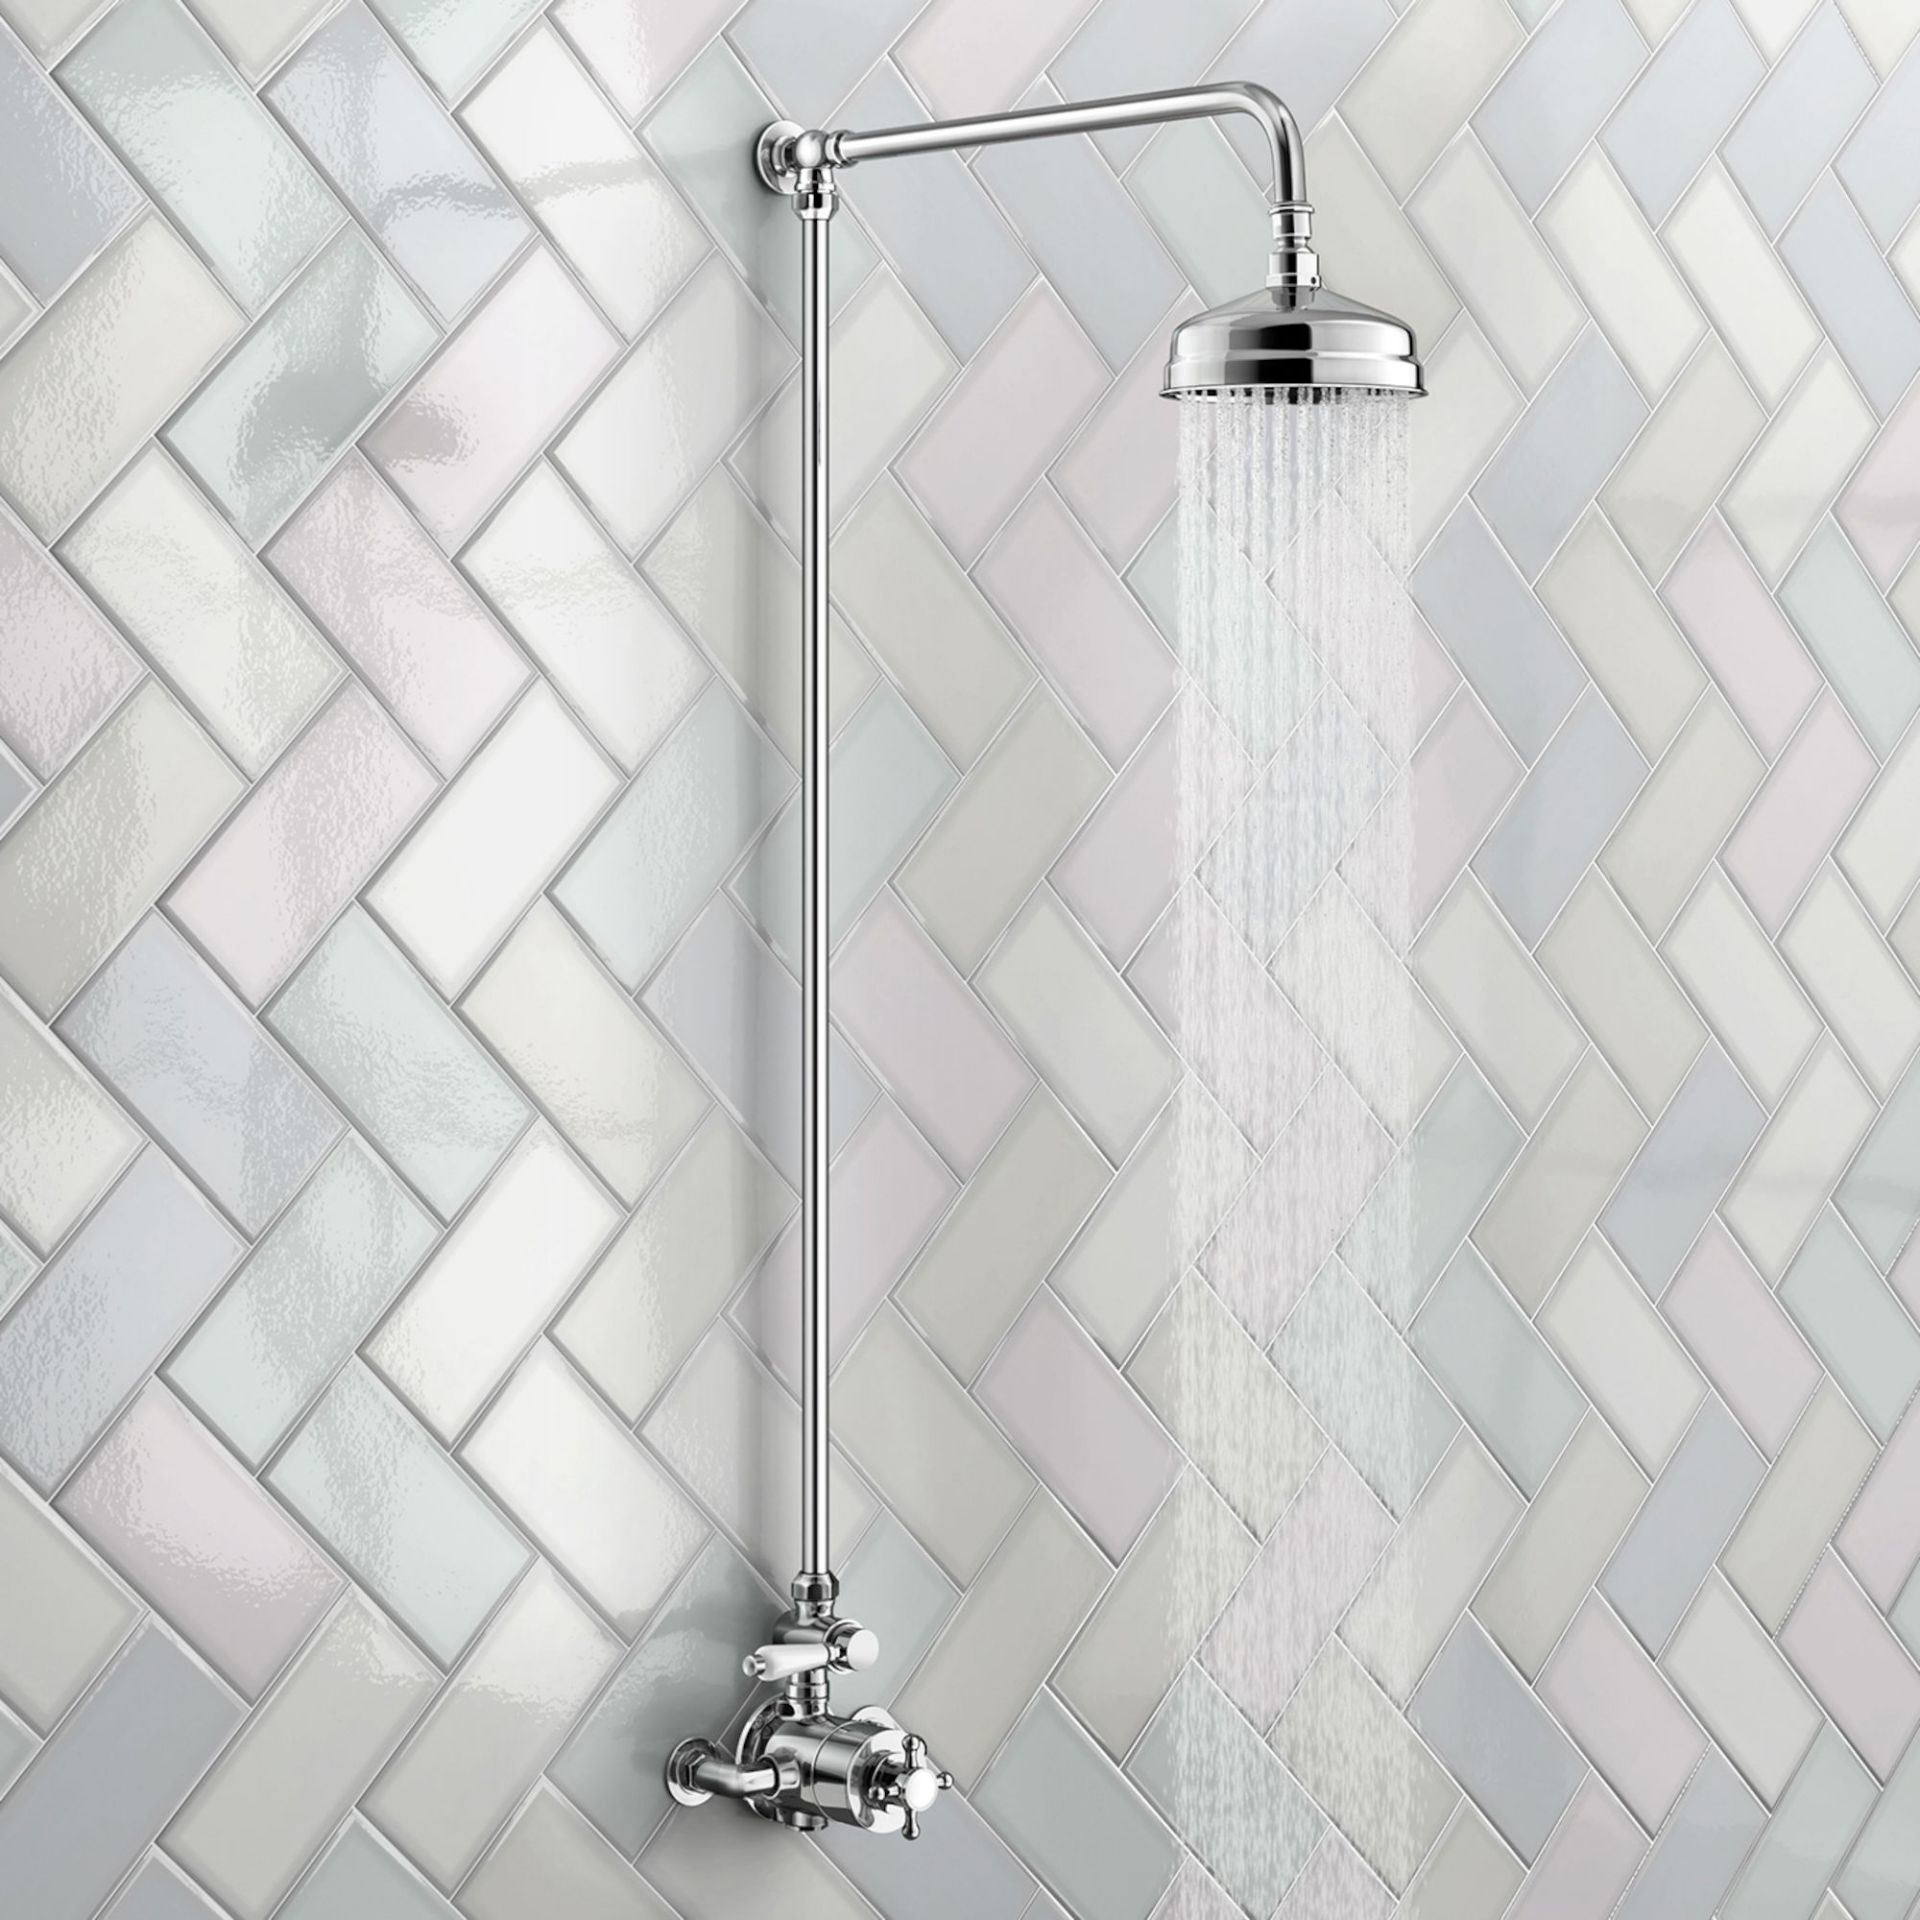 (EW66) Traditional Exposed Thermostatic Shower Kit & Medium Head. Traditional exposed valve